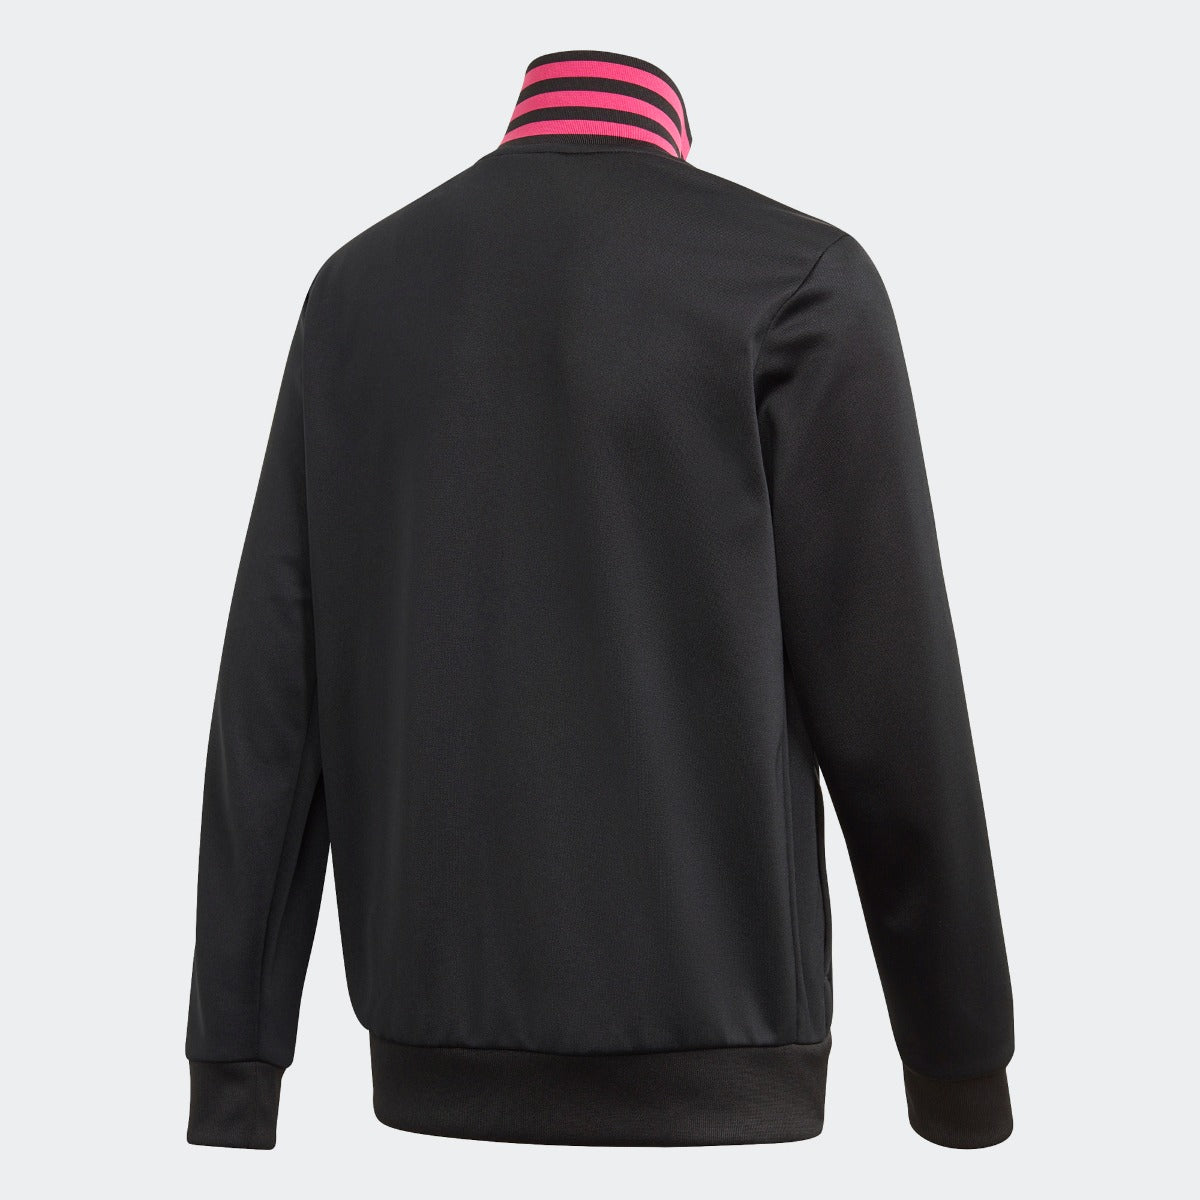 adidas 2020-21 Mexico YOUTH 3-Stripe Track Top - Black-Pink (Back)